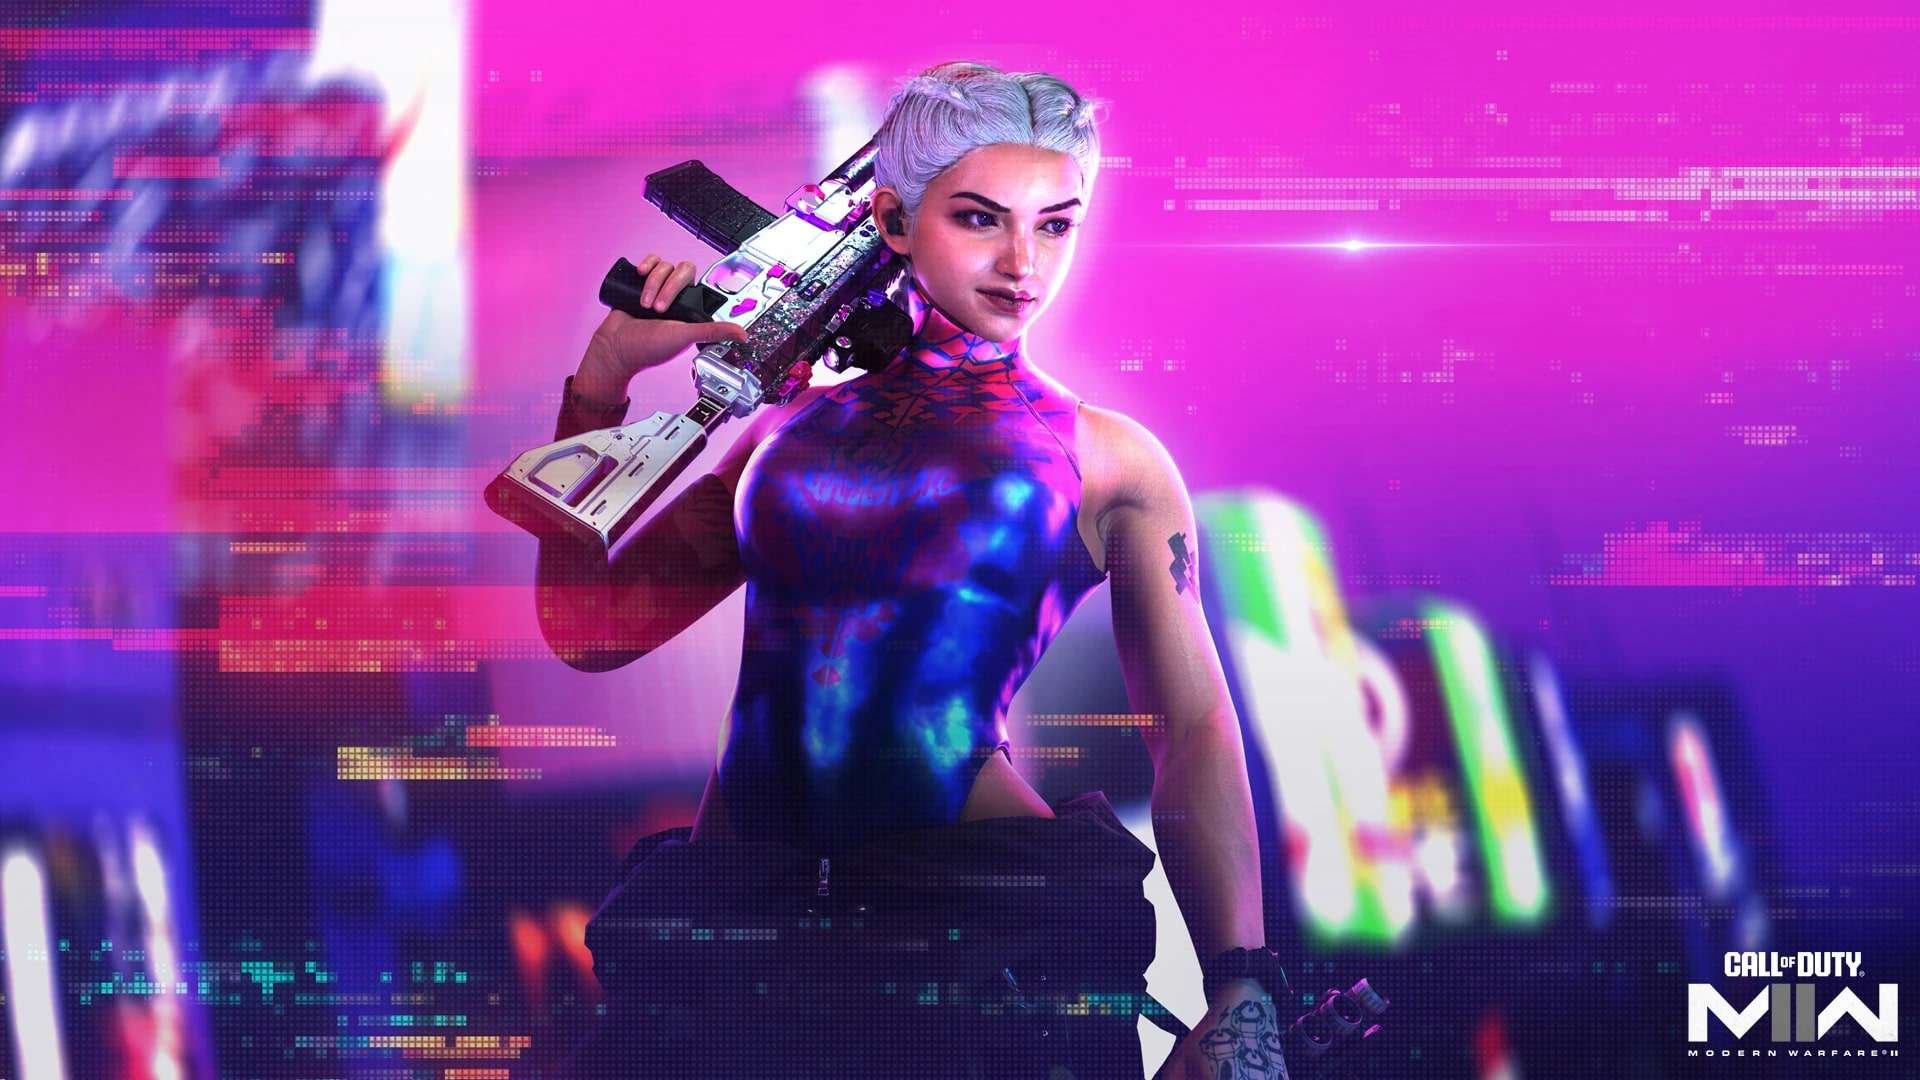 Izzy promo image for Call of Duty